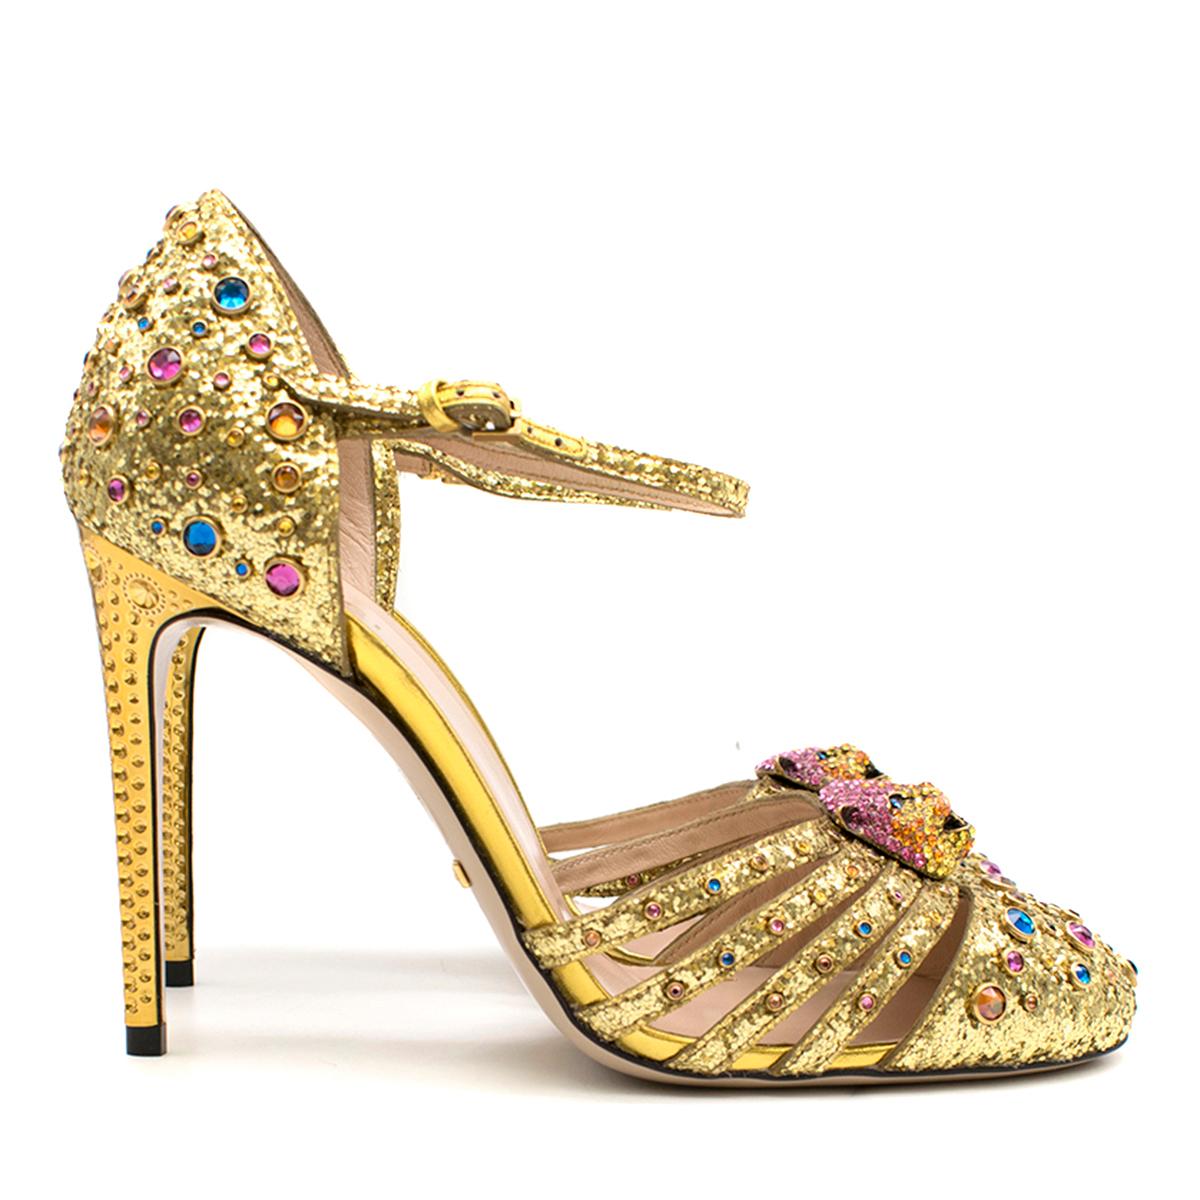 Gucci Polignac Feline Glitter Metallic Leather Pumps

-gold, glitter metallic and leather
-Multicolored jewels
-Crystal Tiger face on tops
-Adjustable ankle strap
-Heel panels
-Gold detail engraving on heel
-Nude leather insole
-Gold 